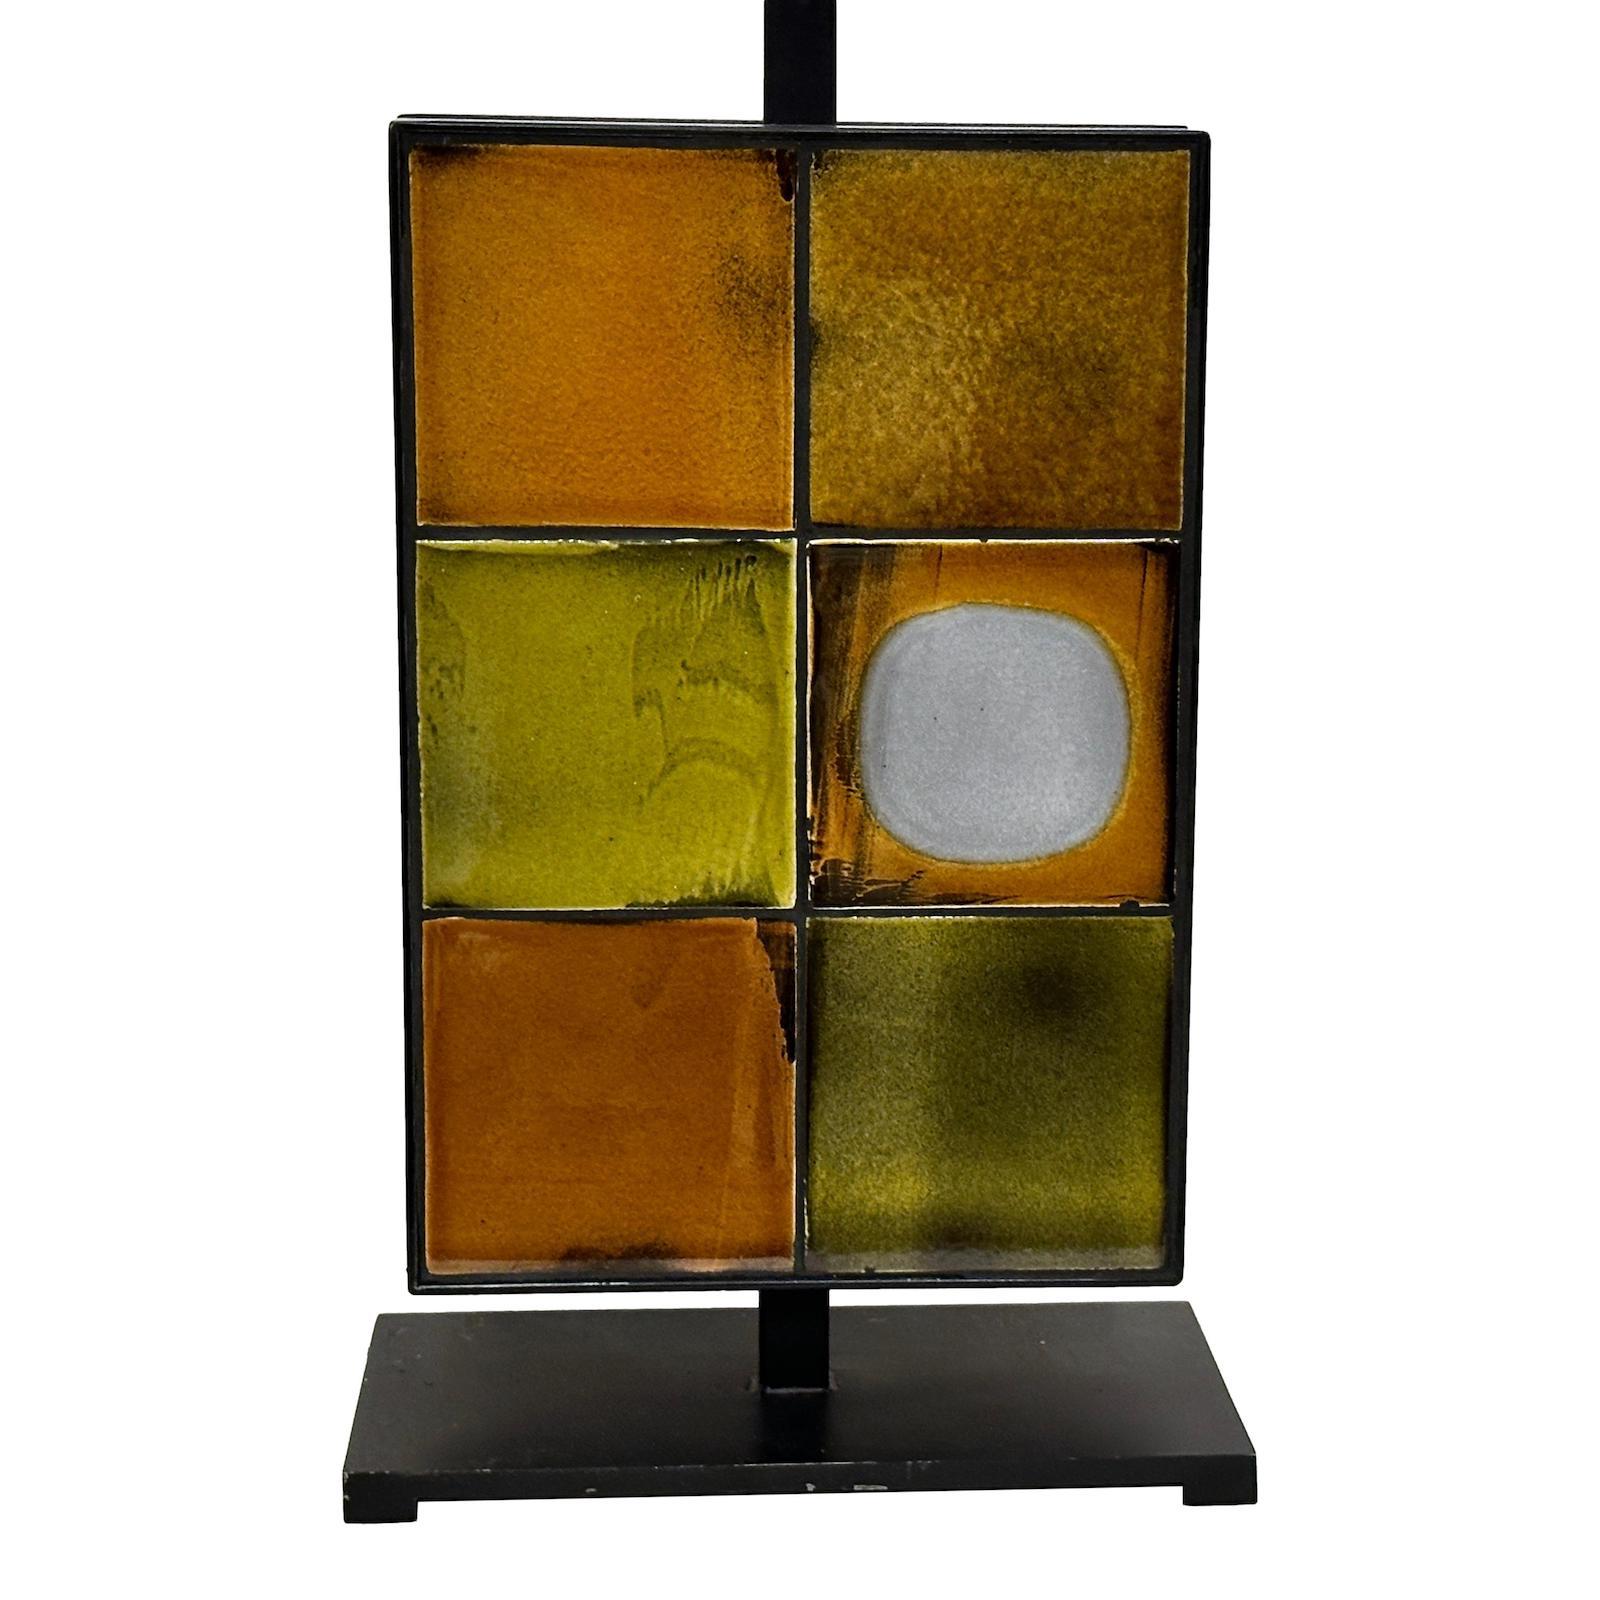 A French circa 1970's lamp with art tiles mounted on both faces.

Measurements:
Height of body: 16